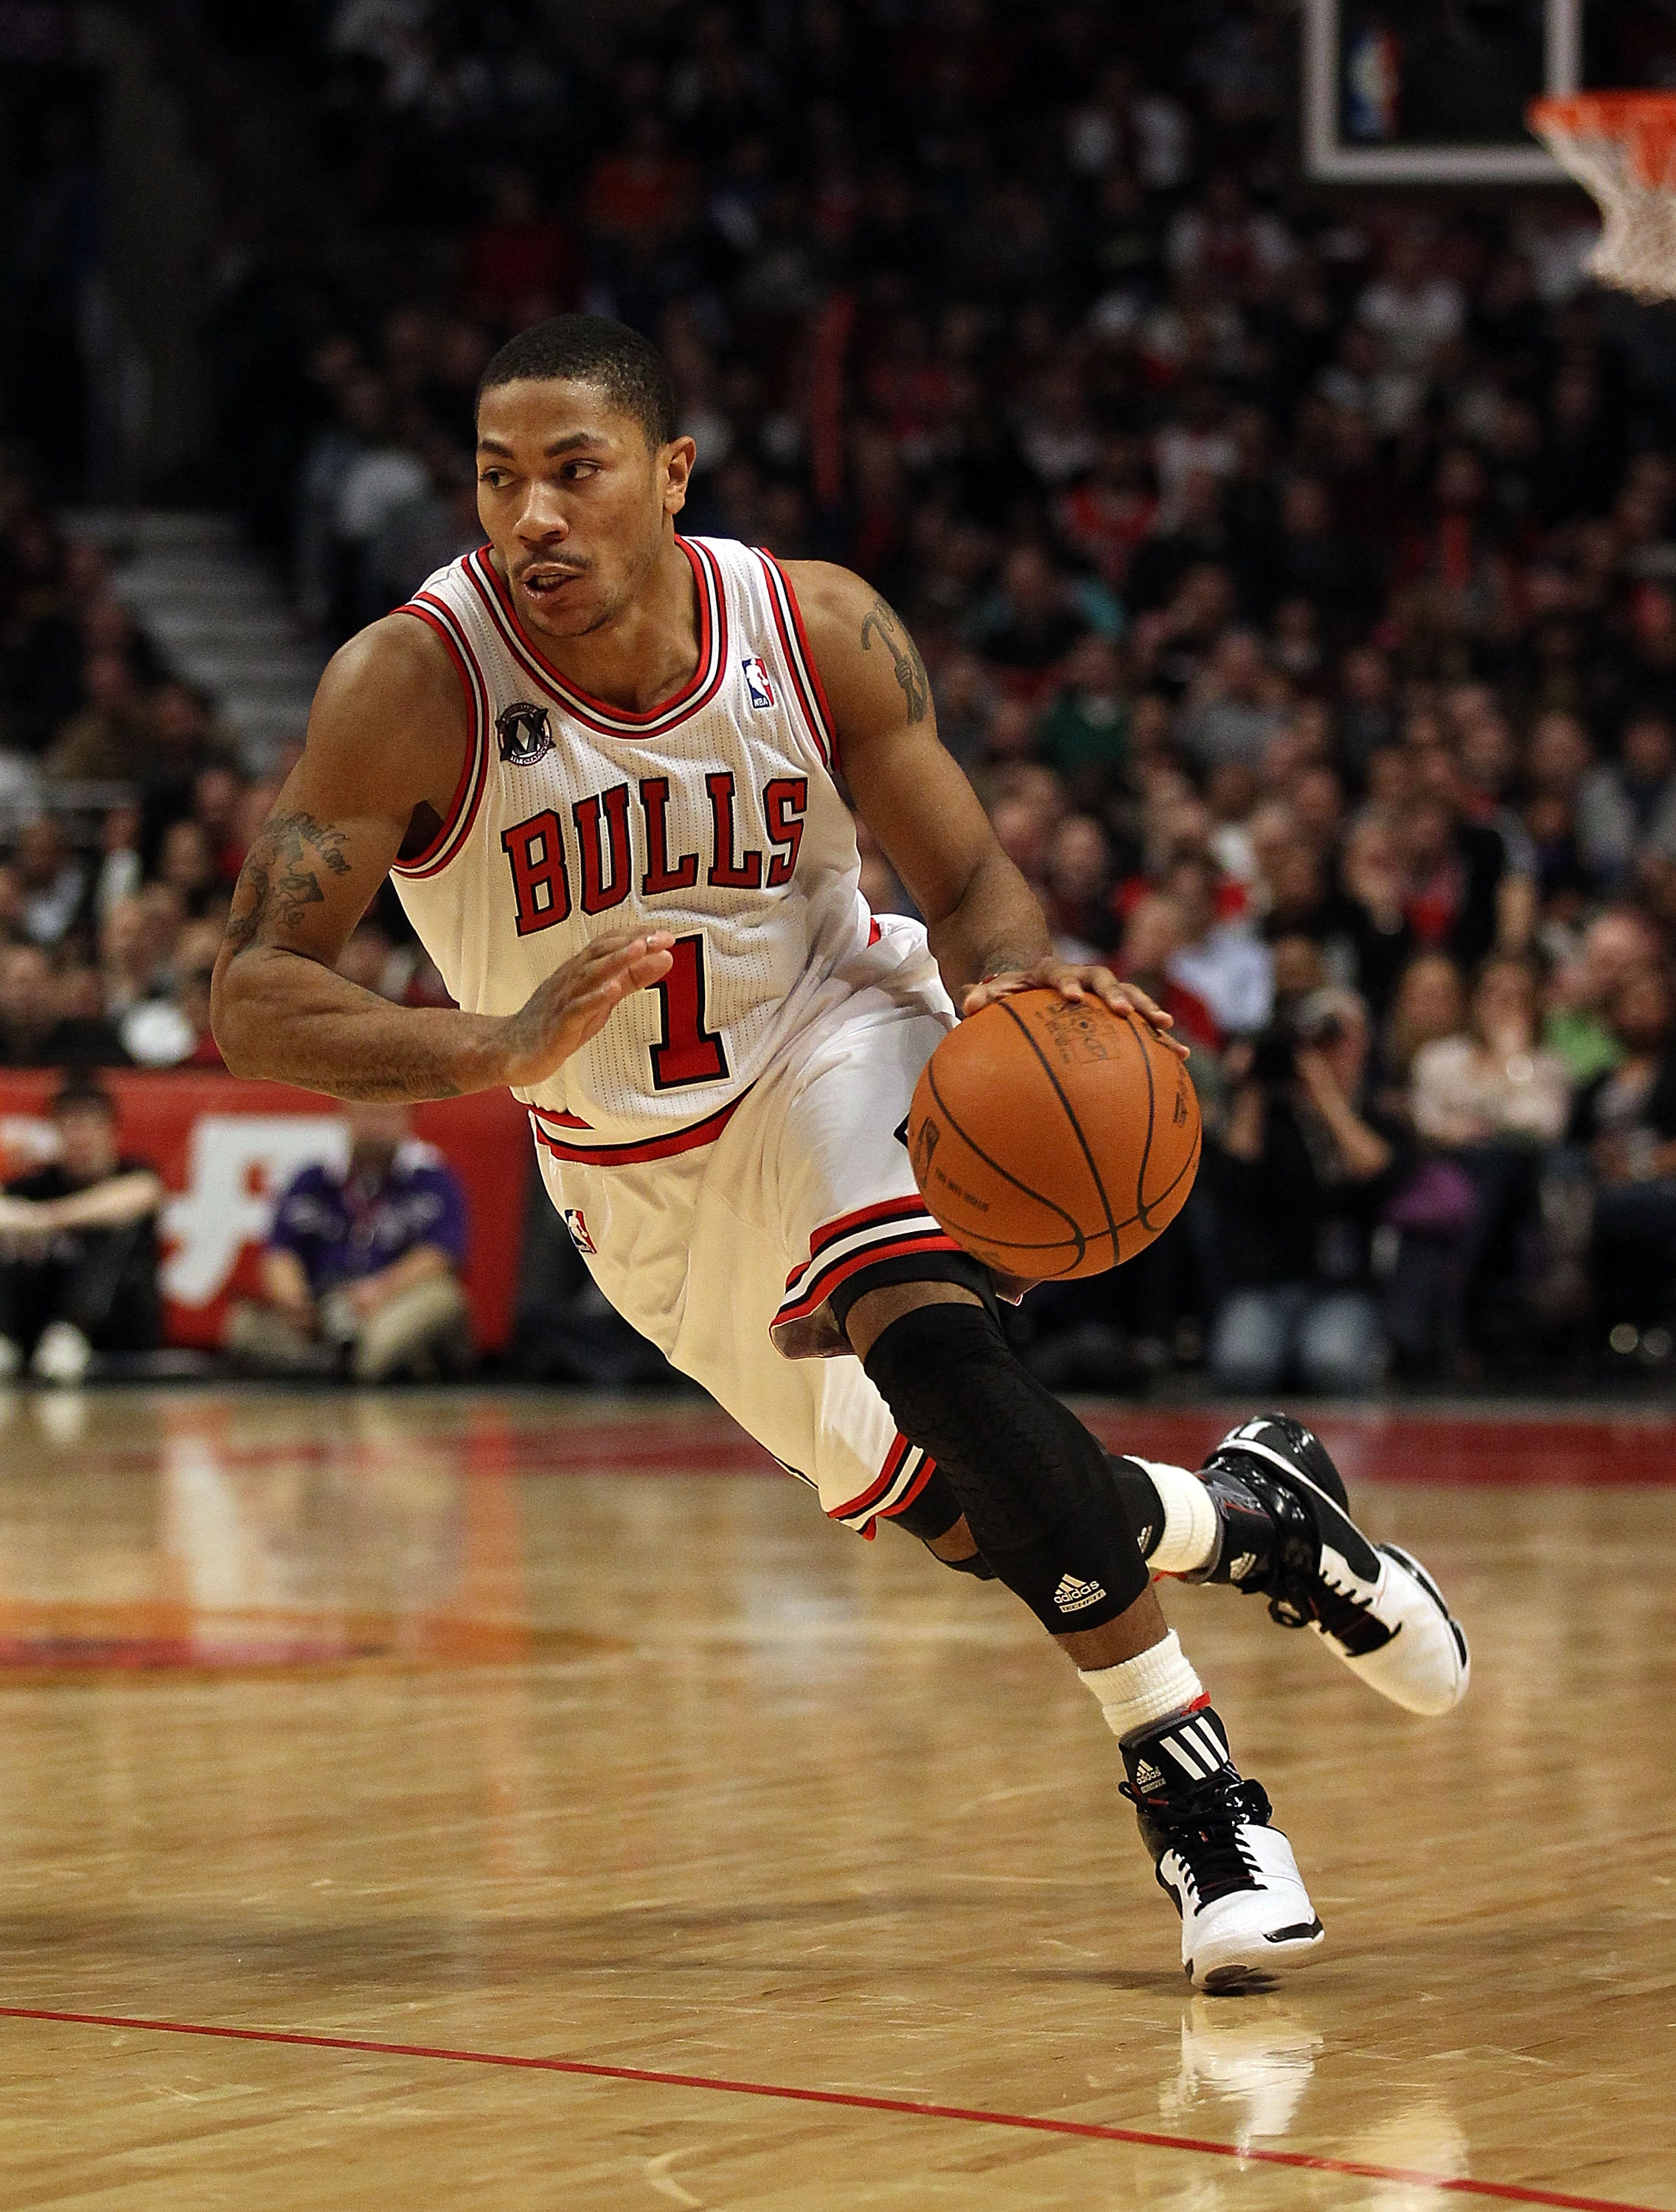 Bulls Talk on X: 9 years ago today, Derrick Rose became the